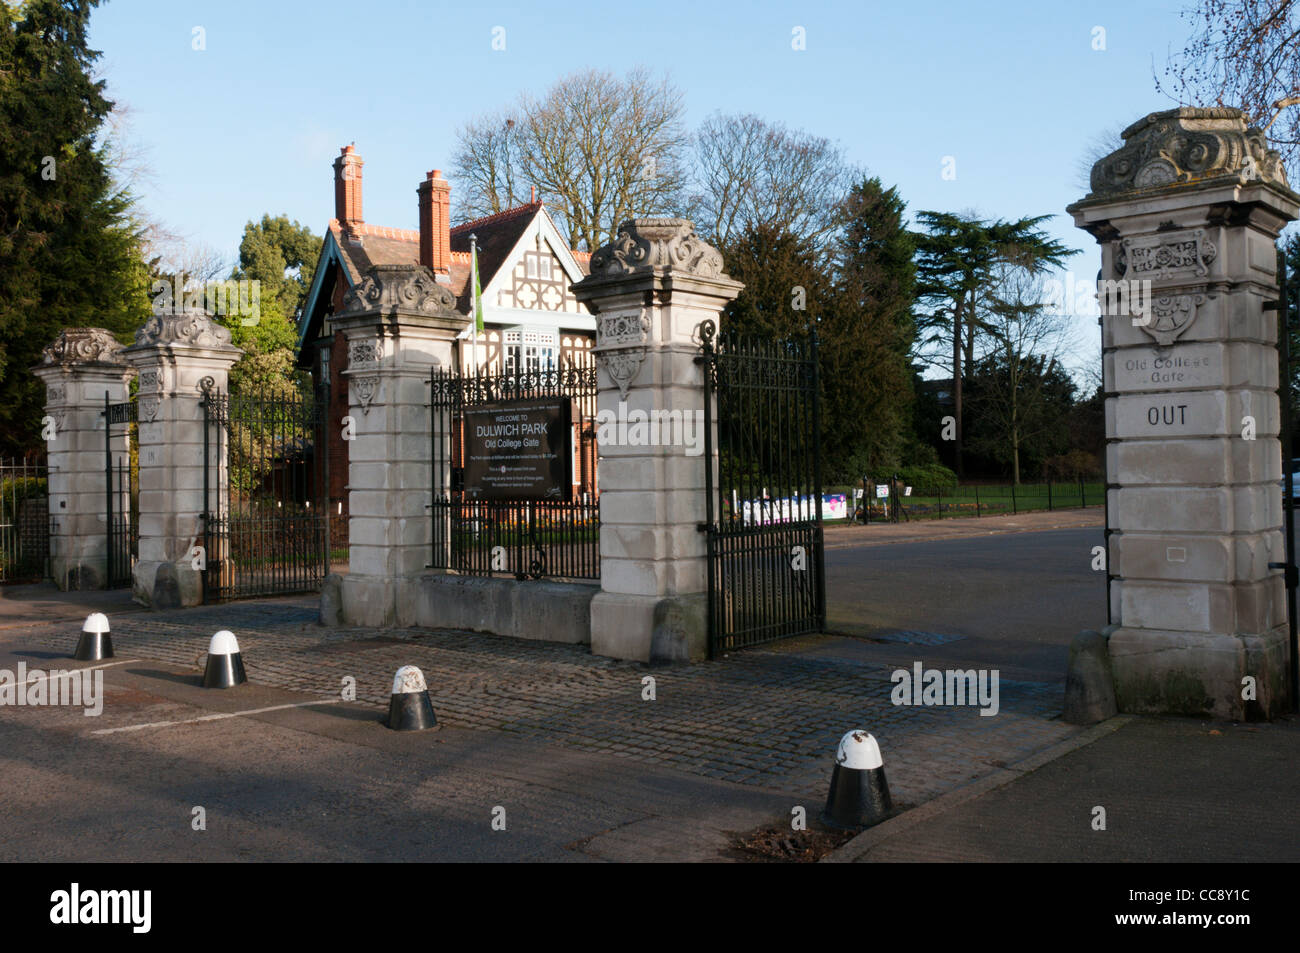 The Old College Gates to Dulwich Park in South London. Stock Photo